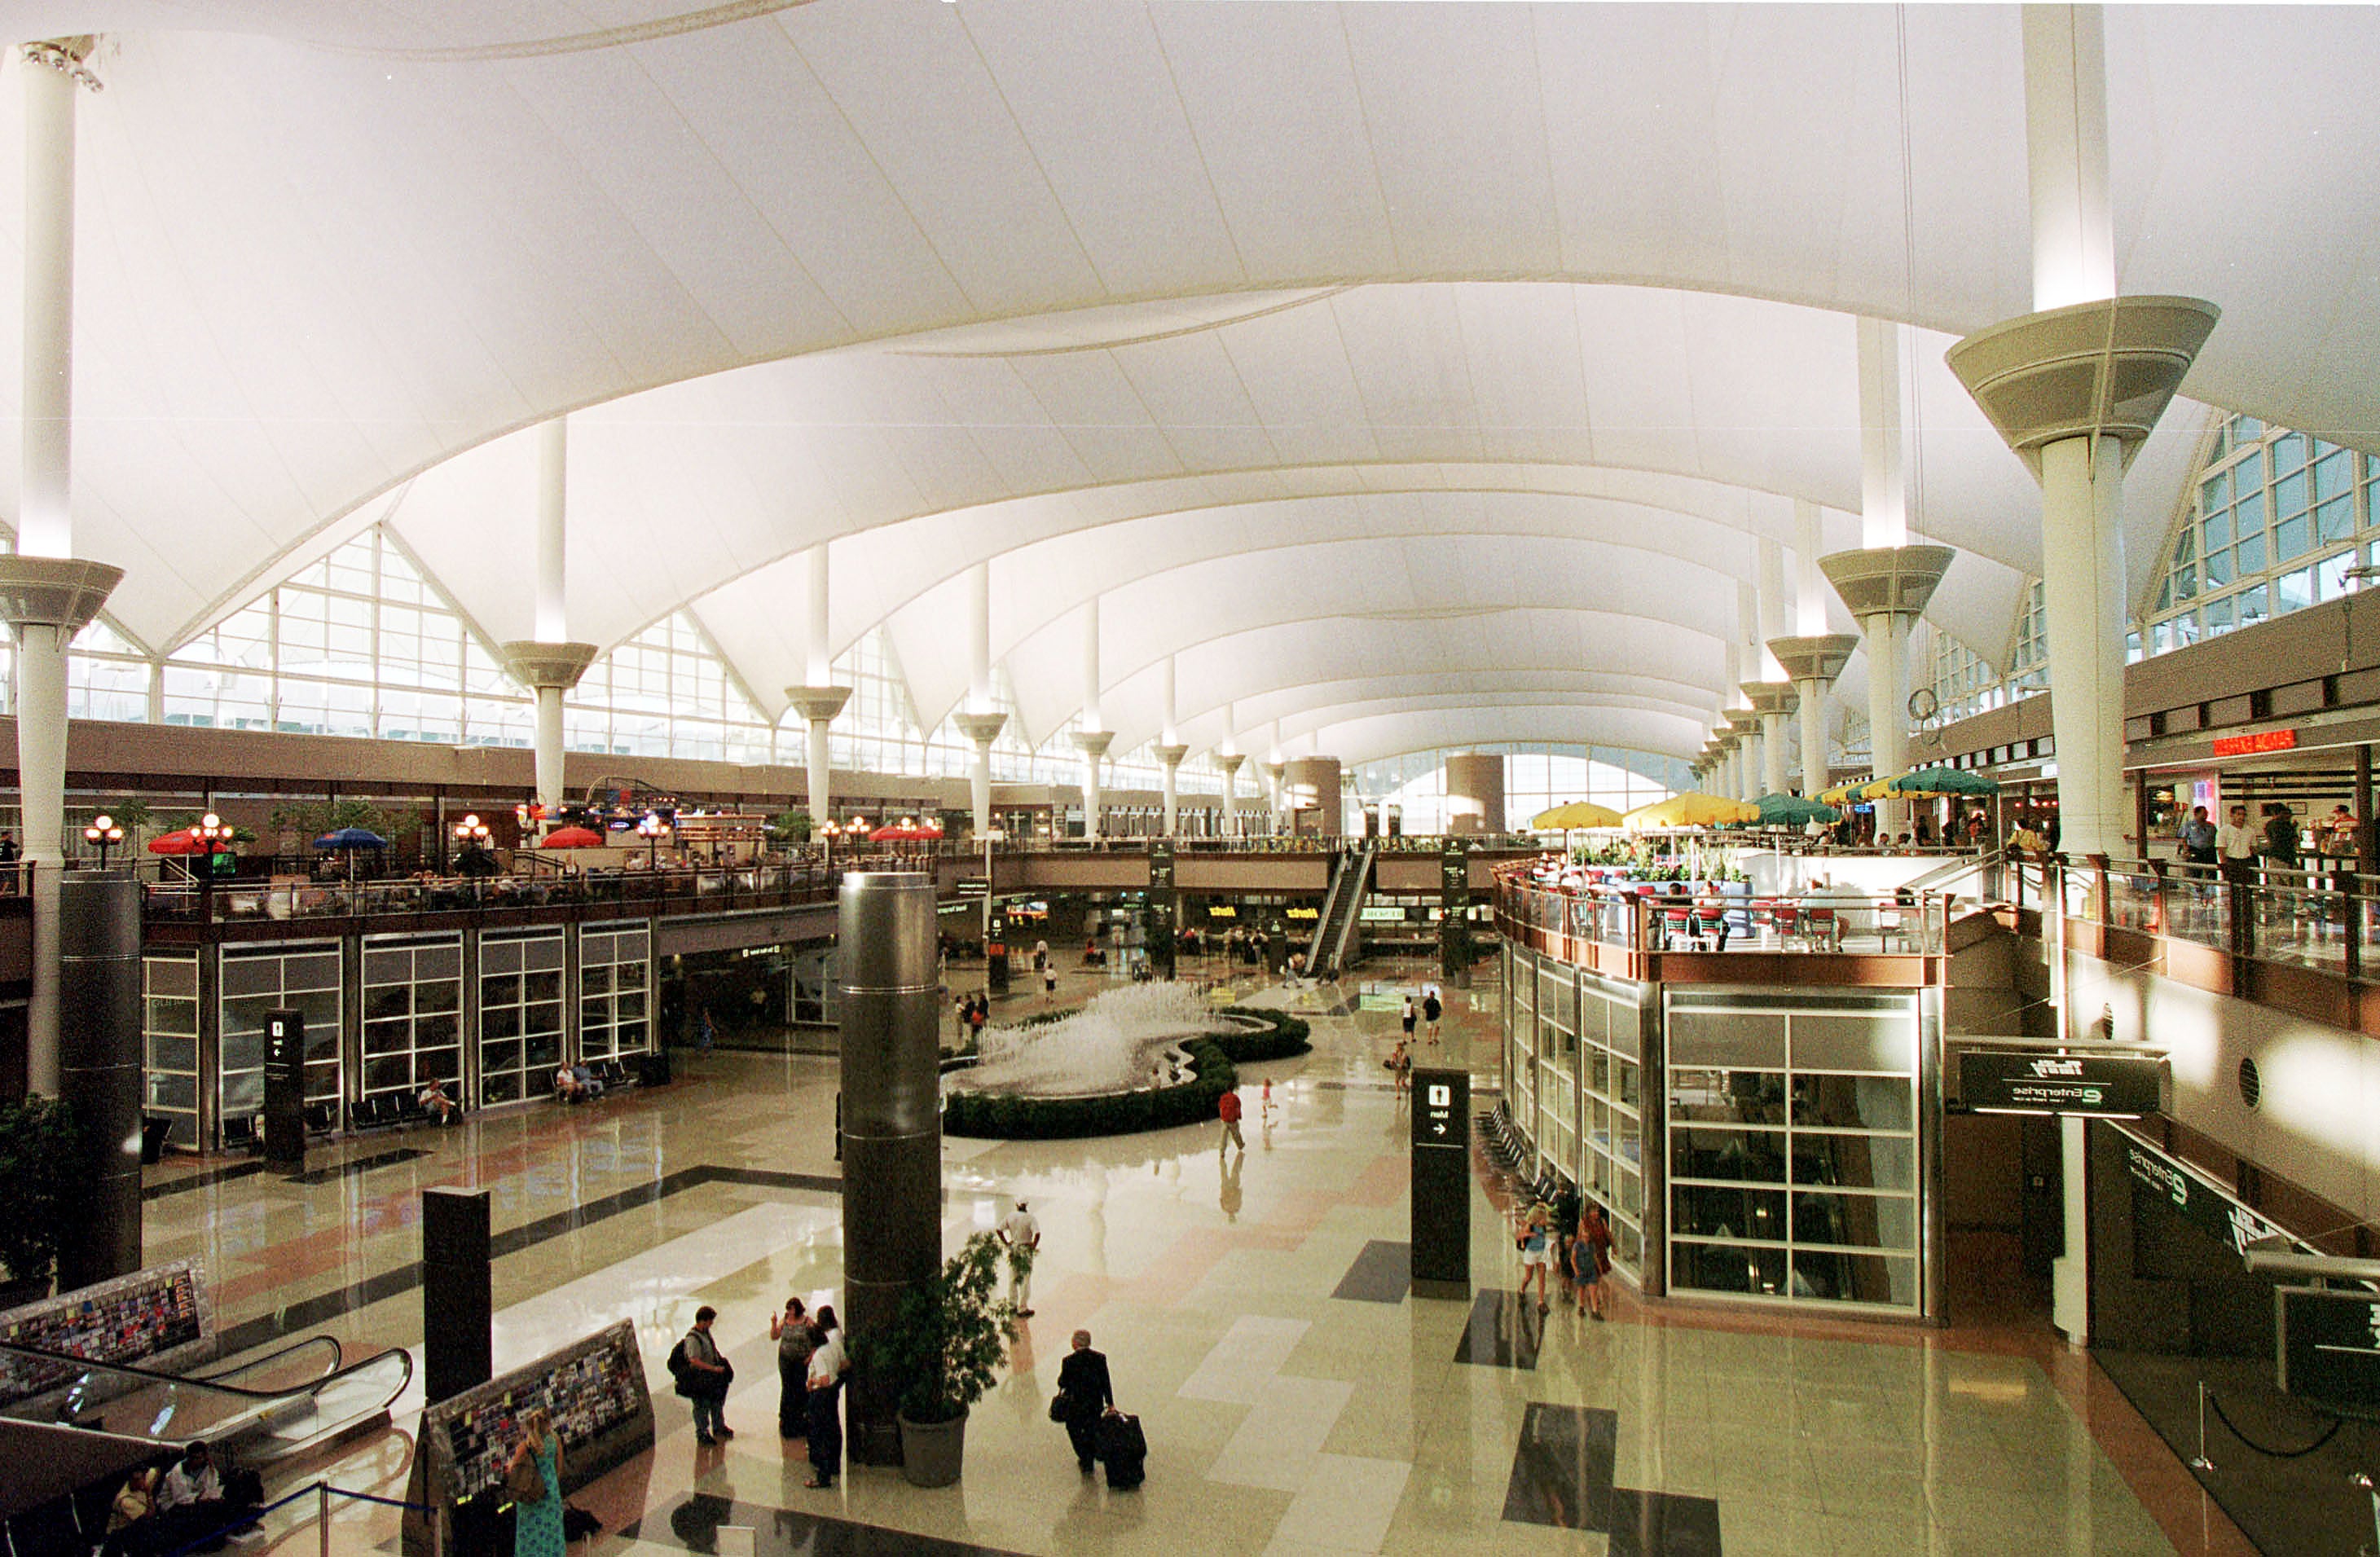 Denver International Airport's main concourse in 2001. (Image: Michael Smith, Getty Images)